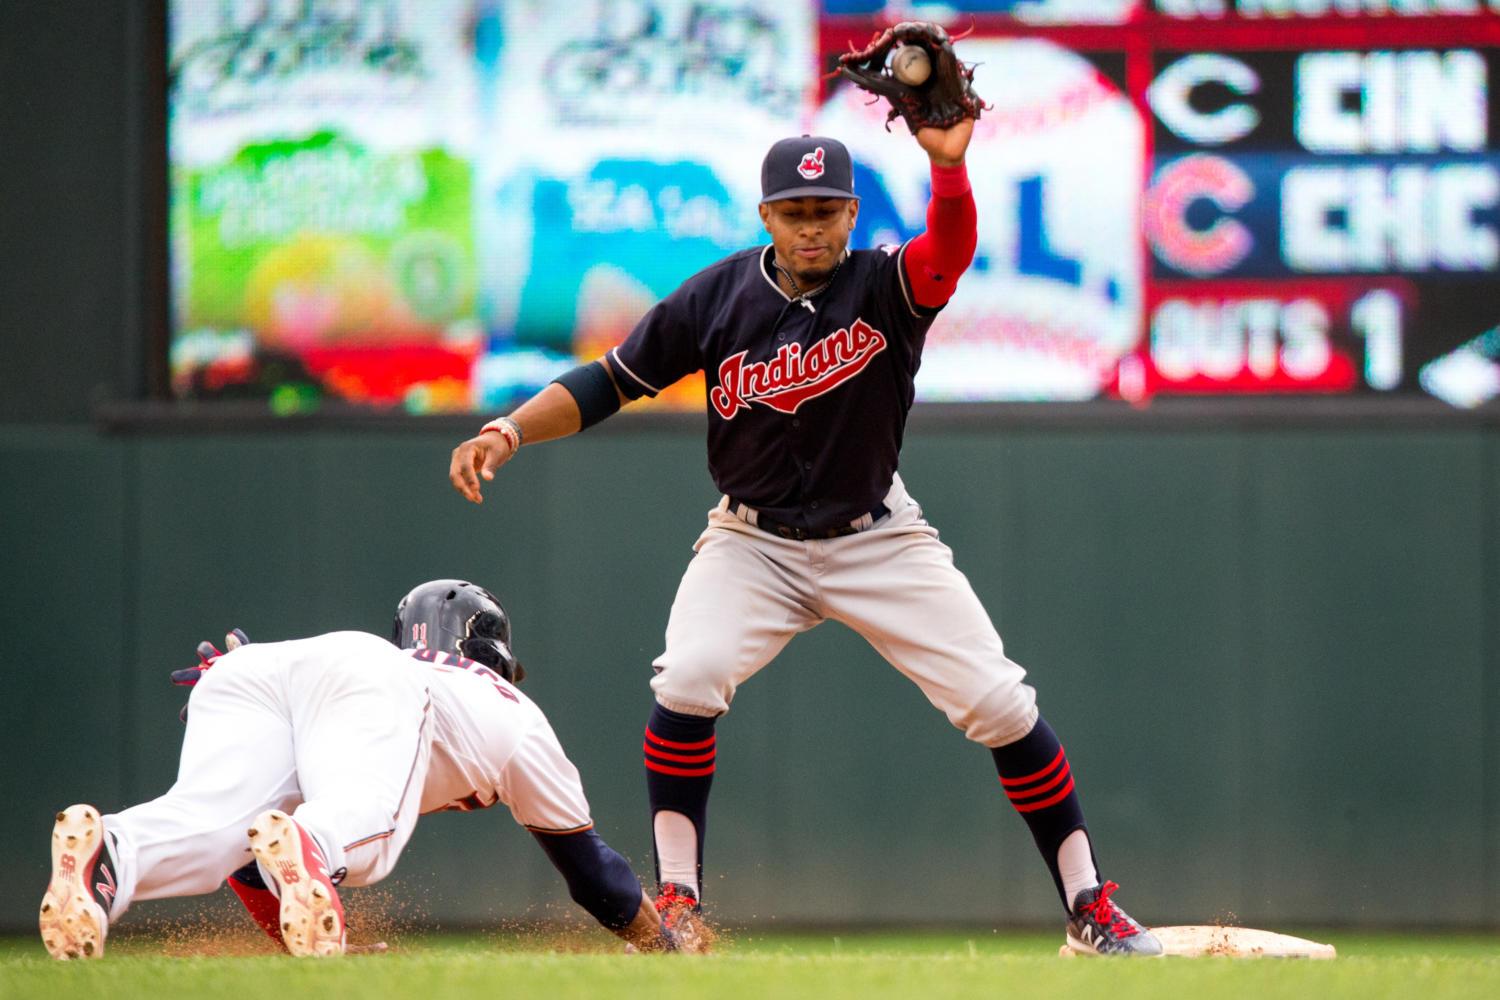 Cleveland Indians shortstop Francisco Lindor tags out the Minnesota Twins' Jorge Polanco, left, at second base during the first game of a doubleheader on Thursday, Aug. 17, 2017, at Target Field in Minneapolis. The Indians won, 9-3.